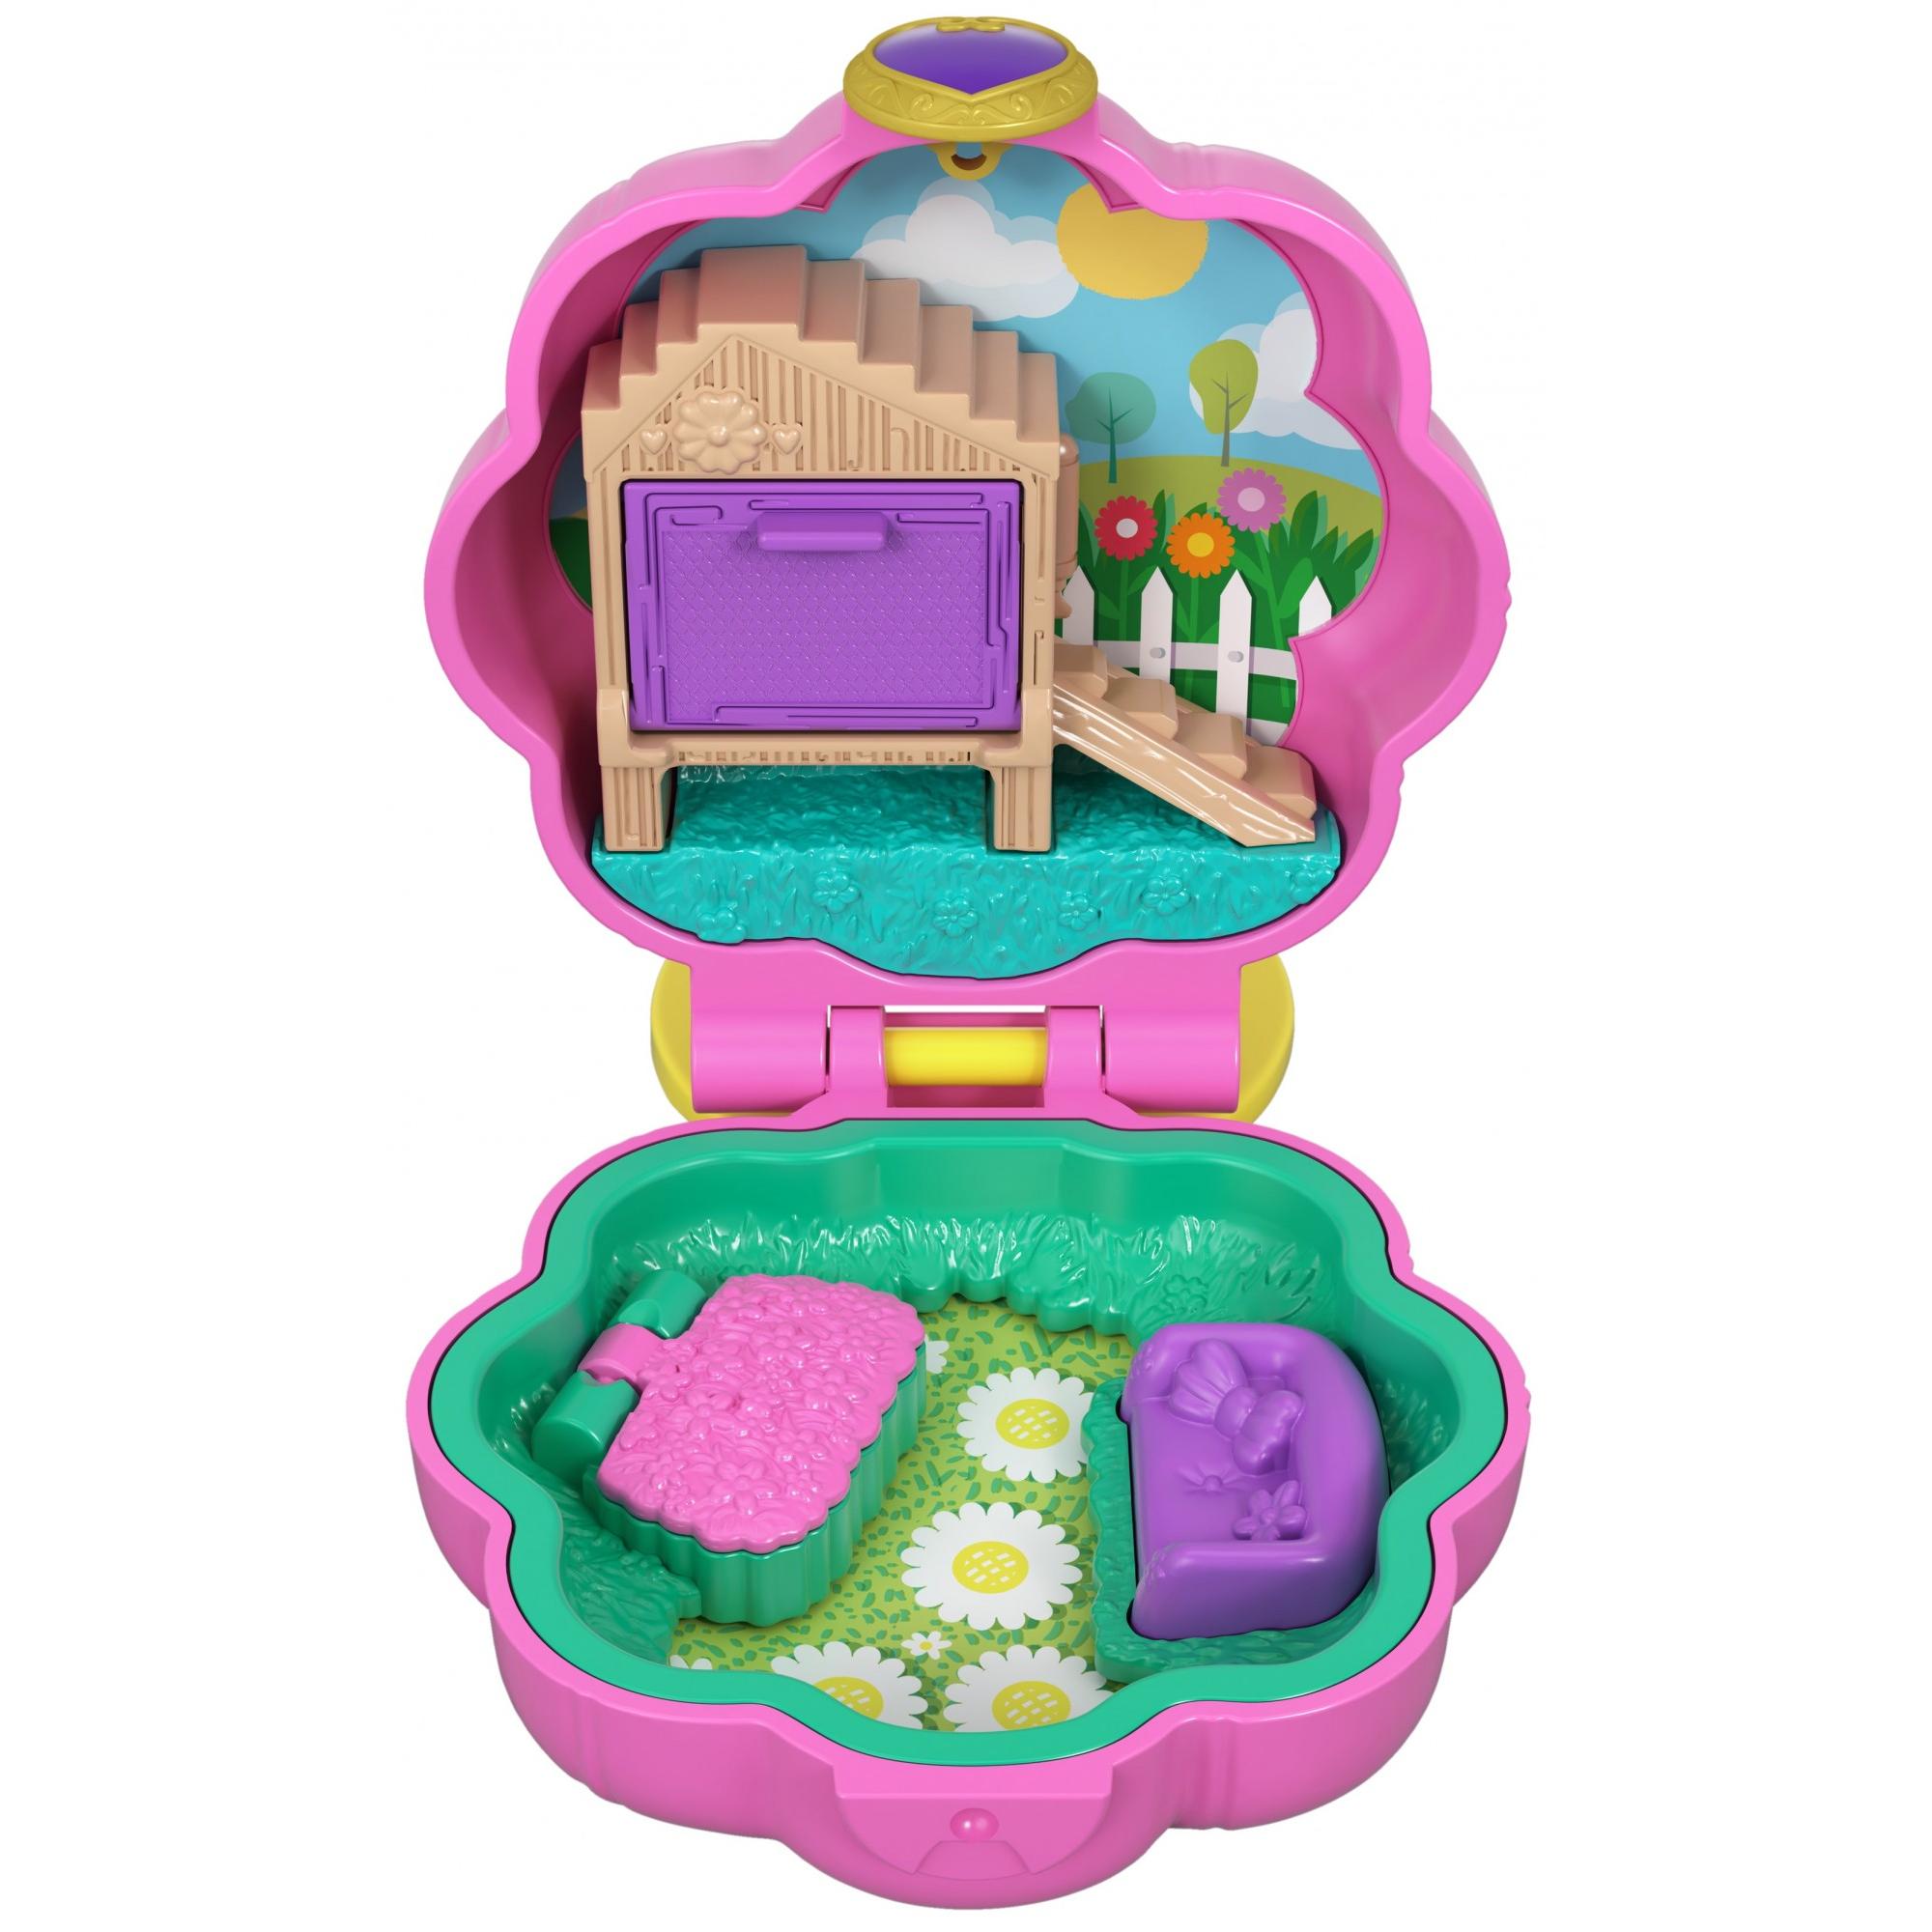 Polly Pocket Tiny Pocket Places Lila Pet Compact with Doll - image 4 of 7